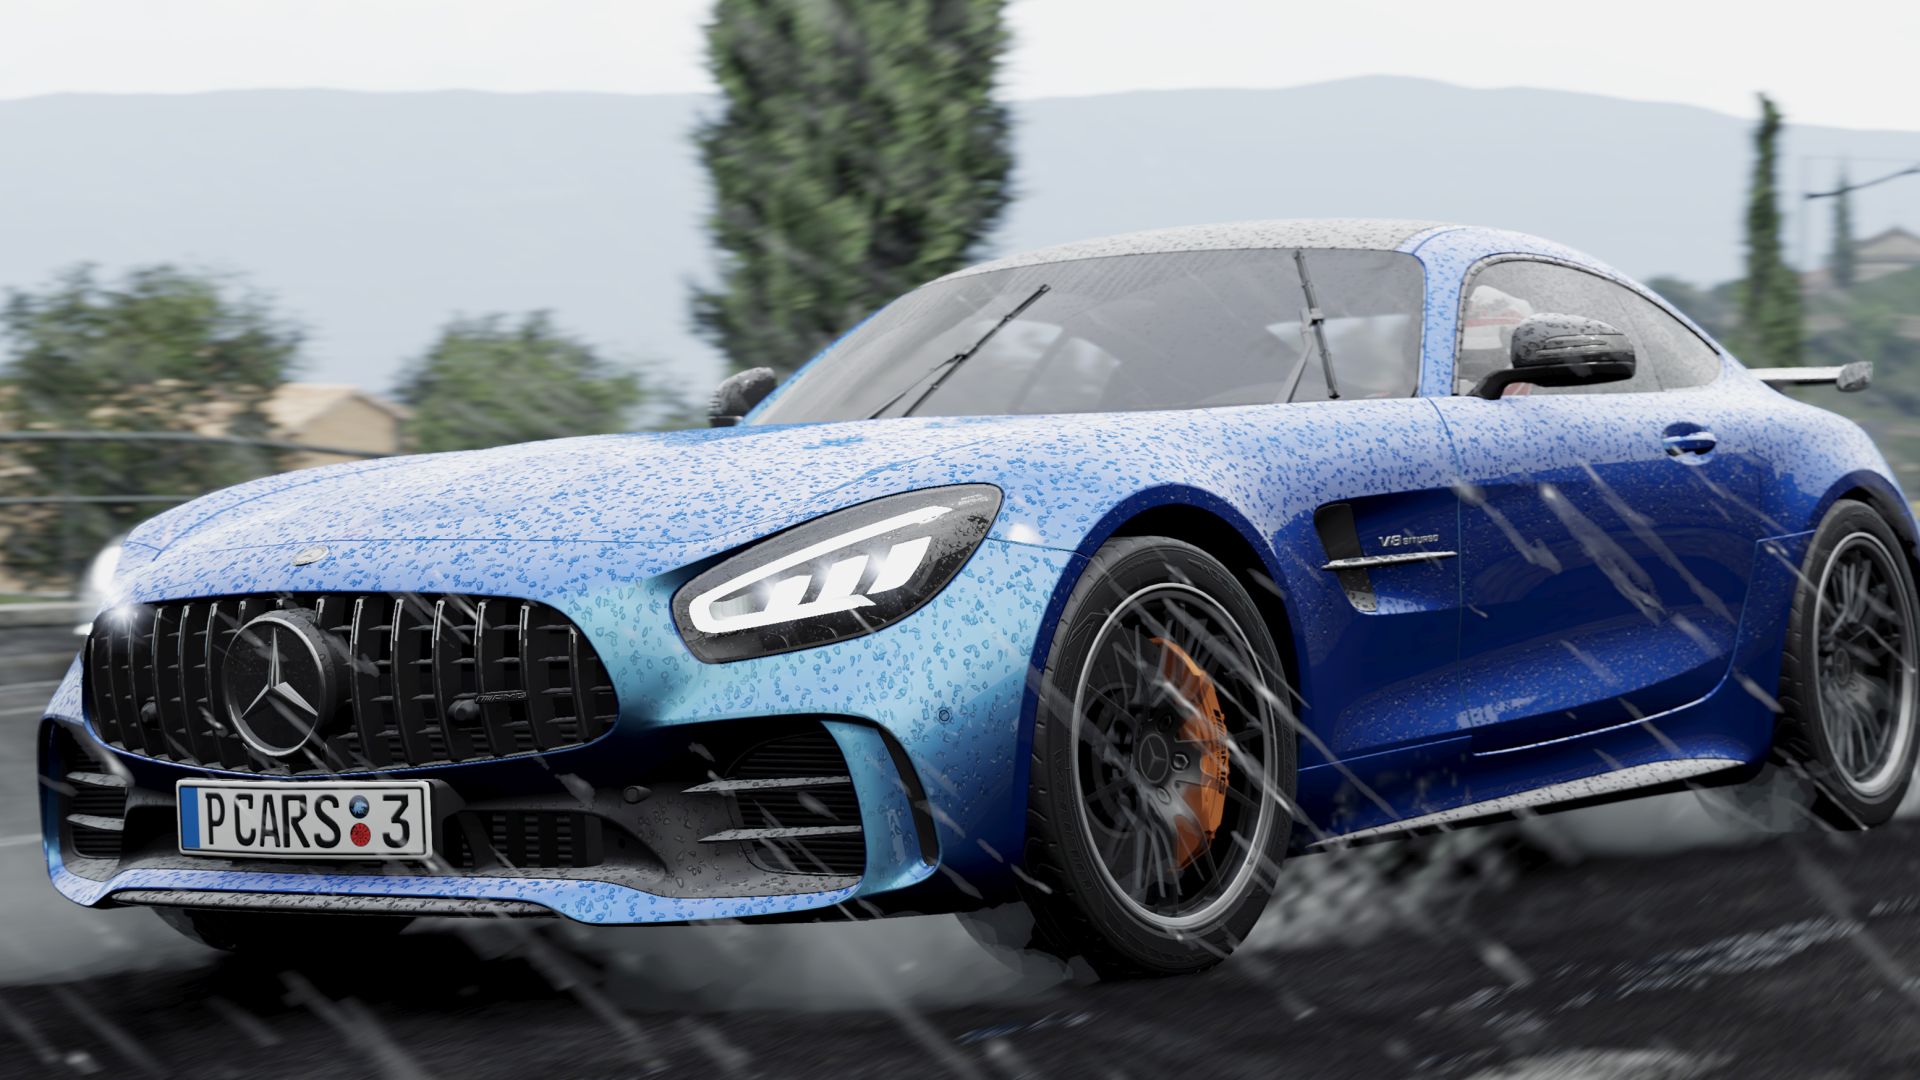 project cars pc launch without choosing vr